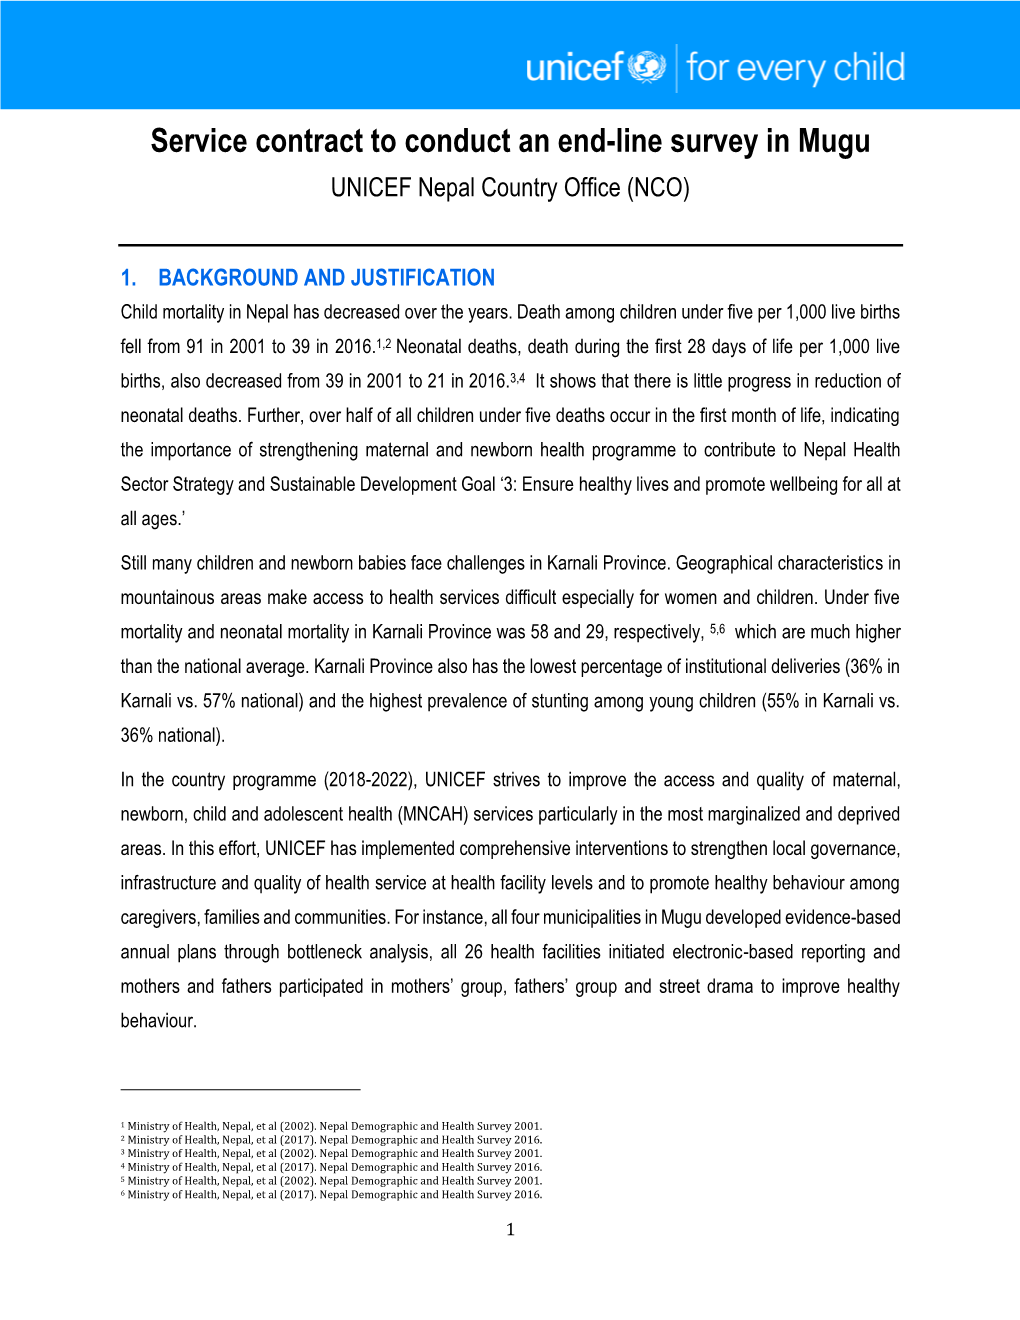 Service Contract to Conduct an End-Line Survey in Mugu UNICEF Nepal Country Office (NCO)